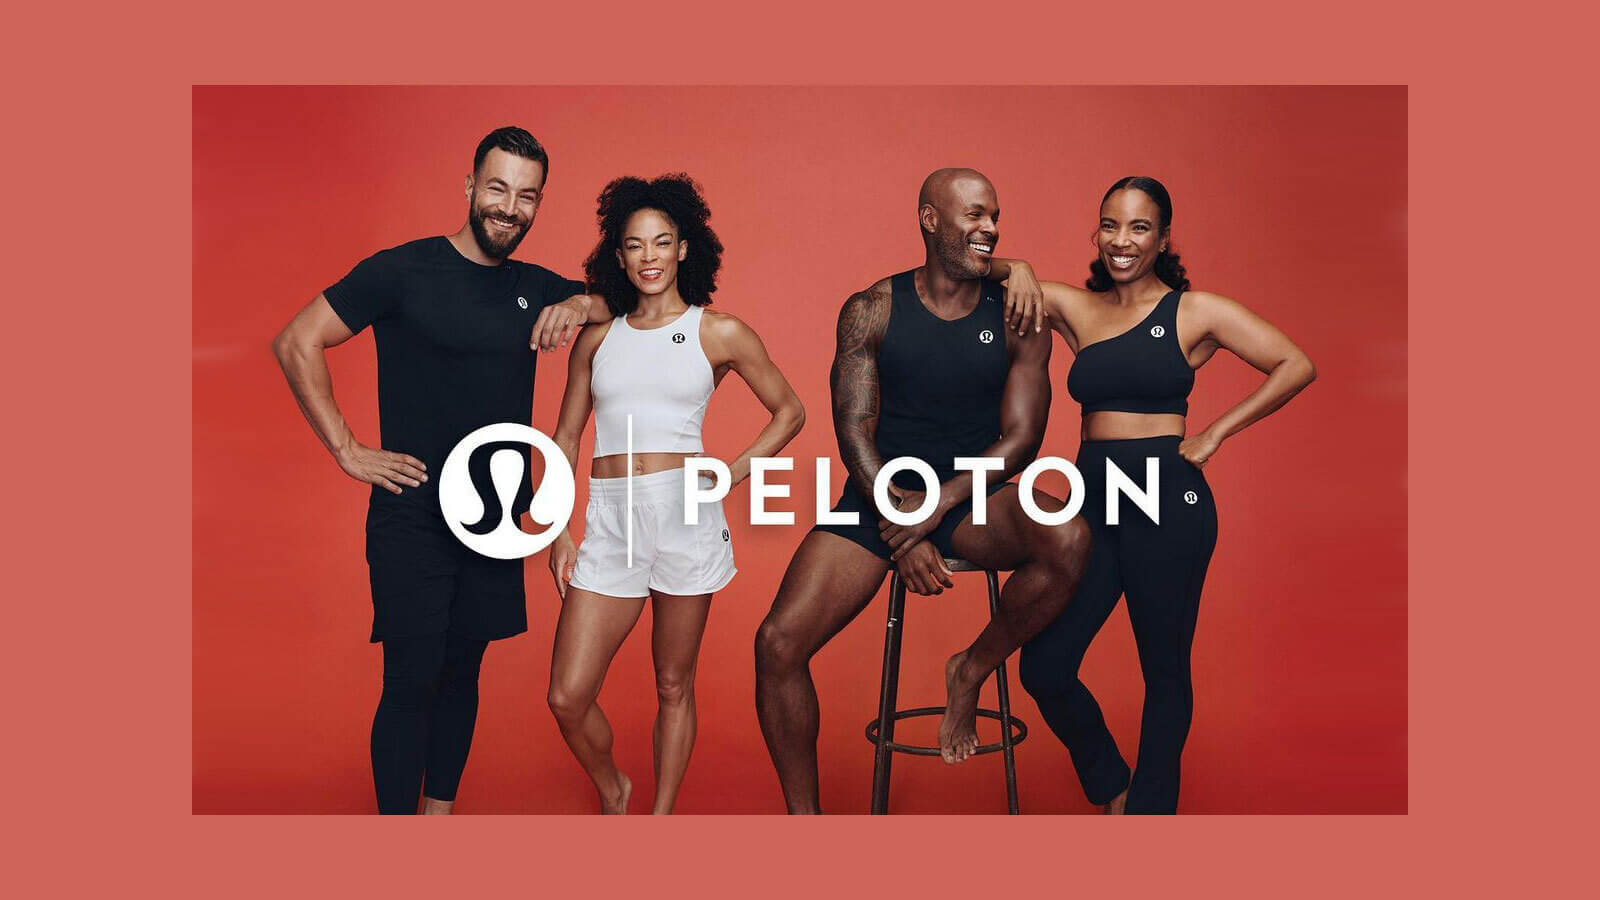 Lululemon and Peloton logos in front of four people in fitness apparel